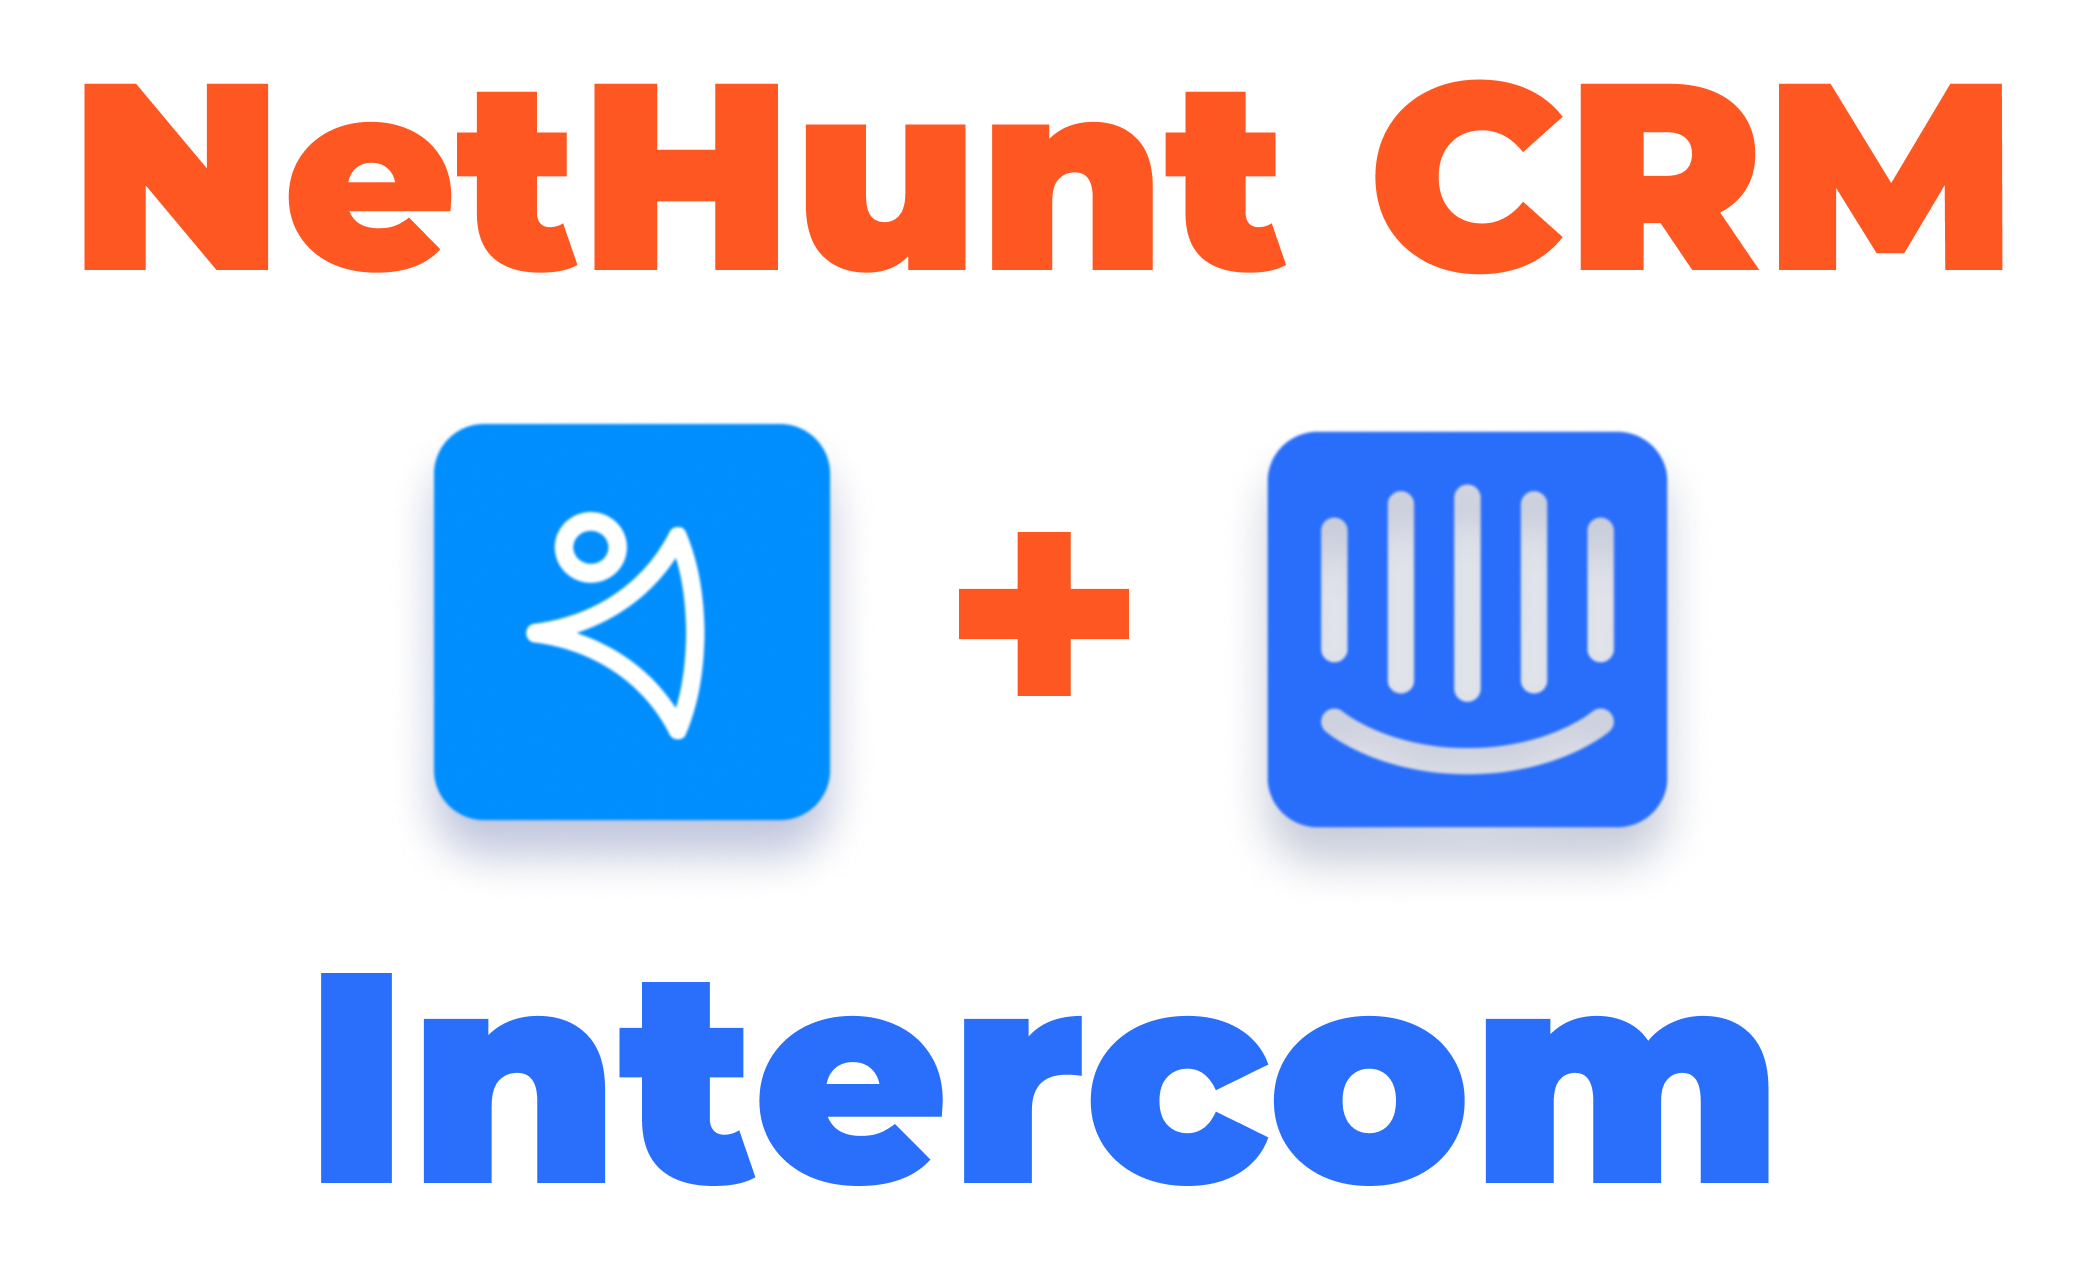 NetHunt CRM releases its integration with Intercom